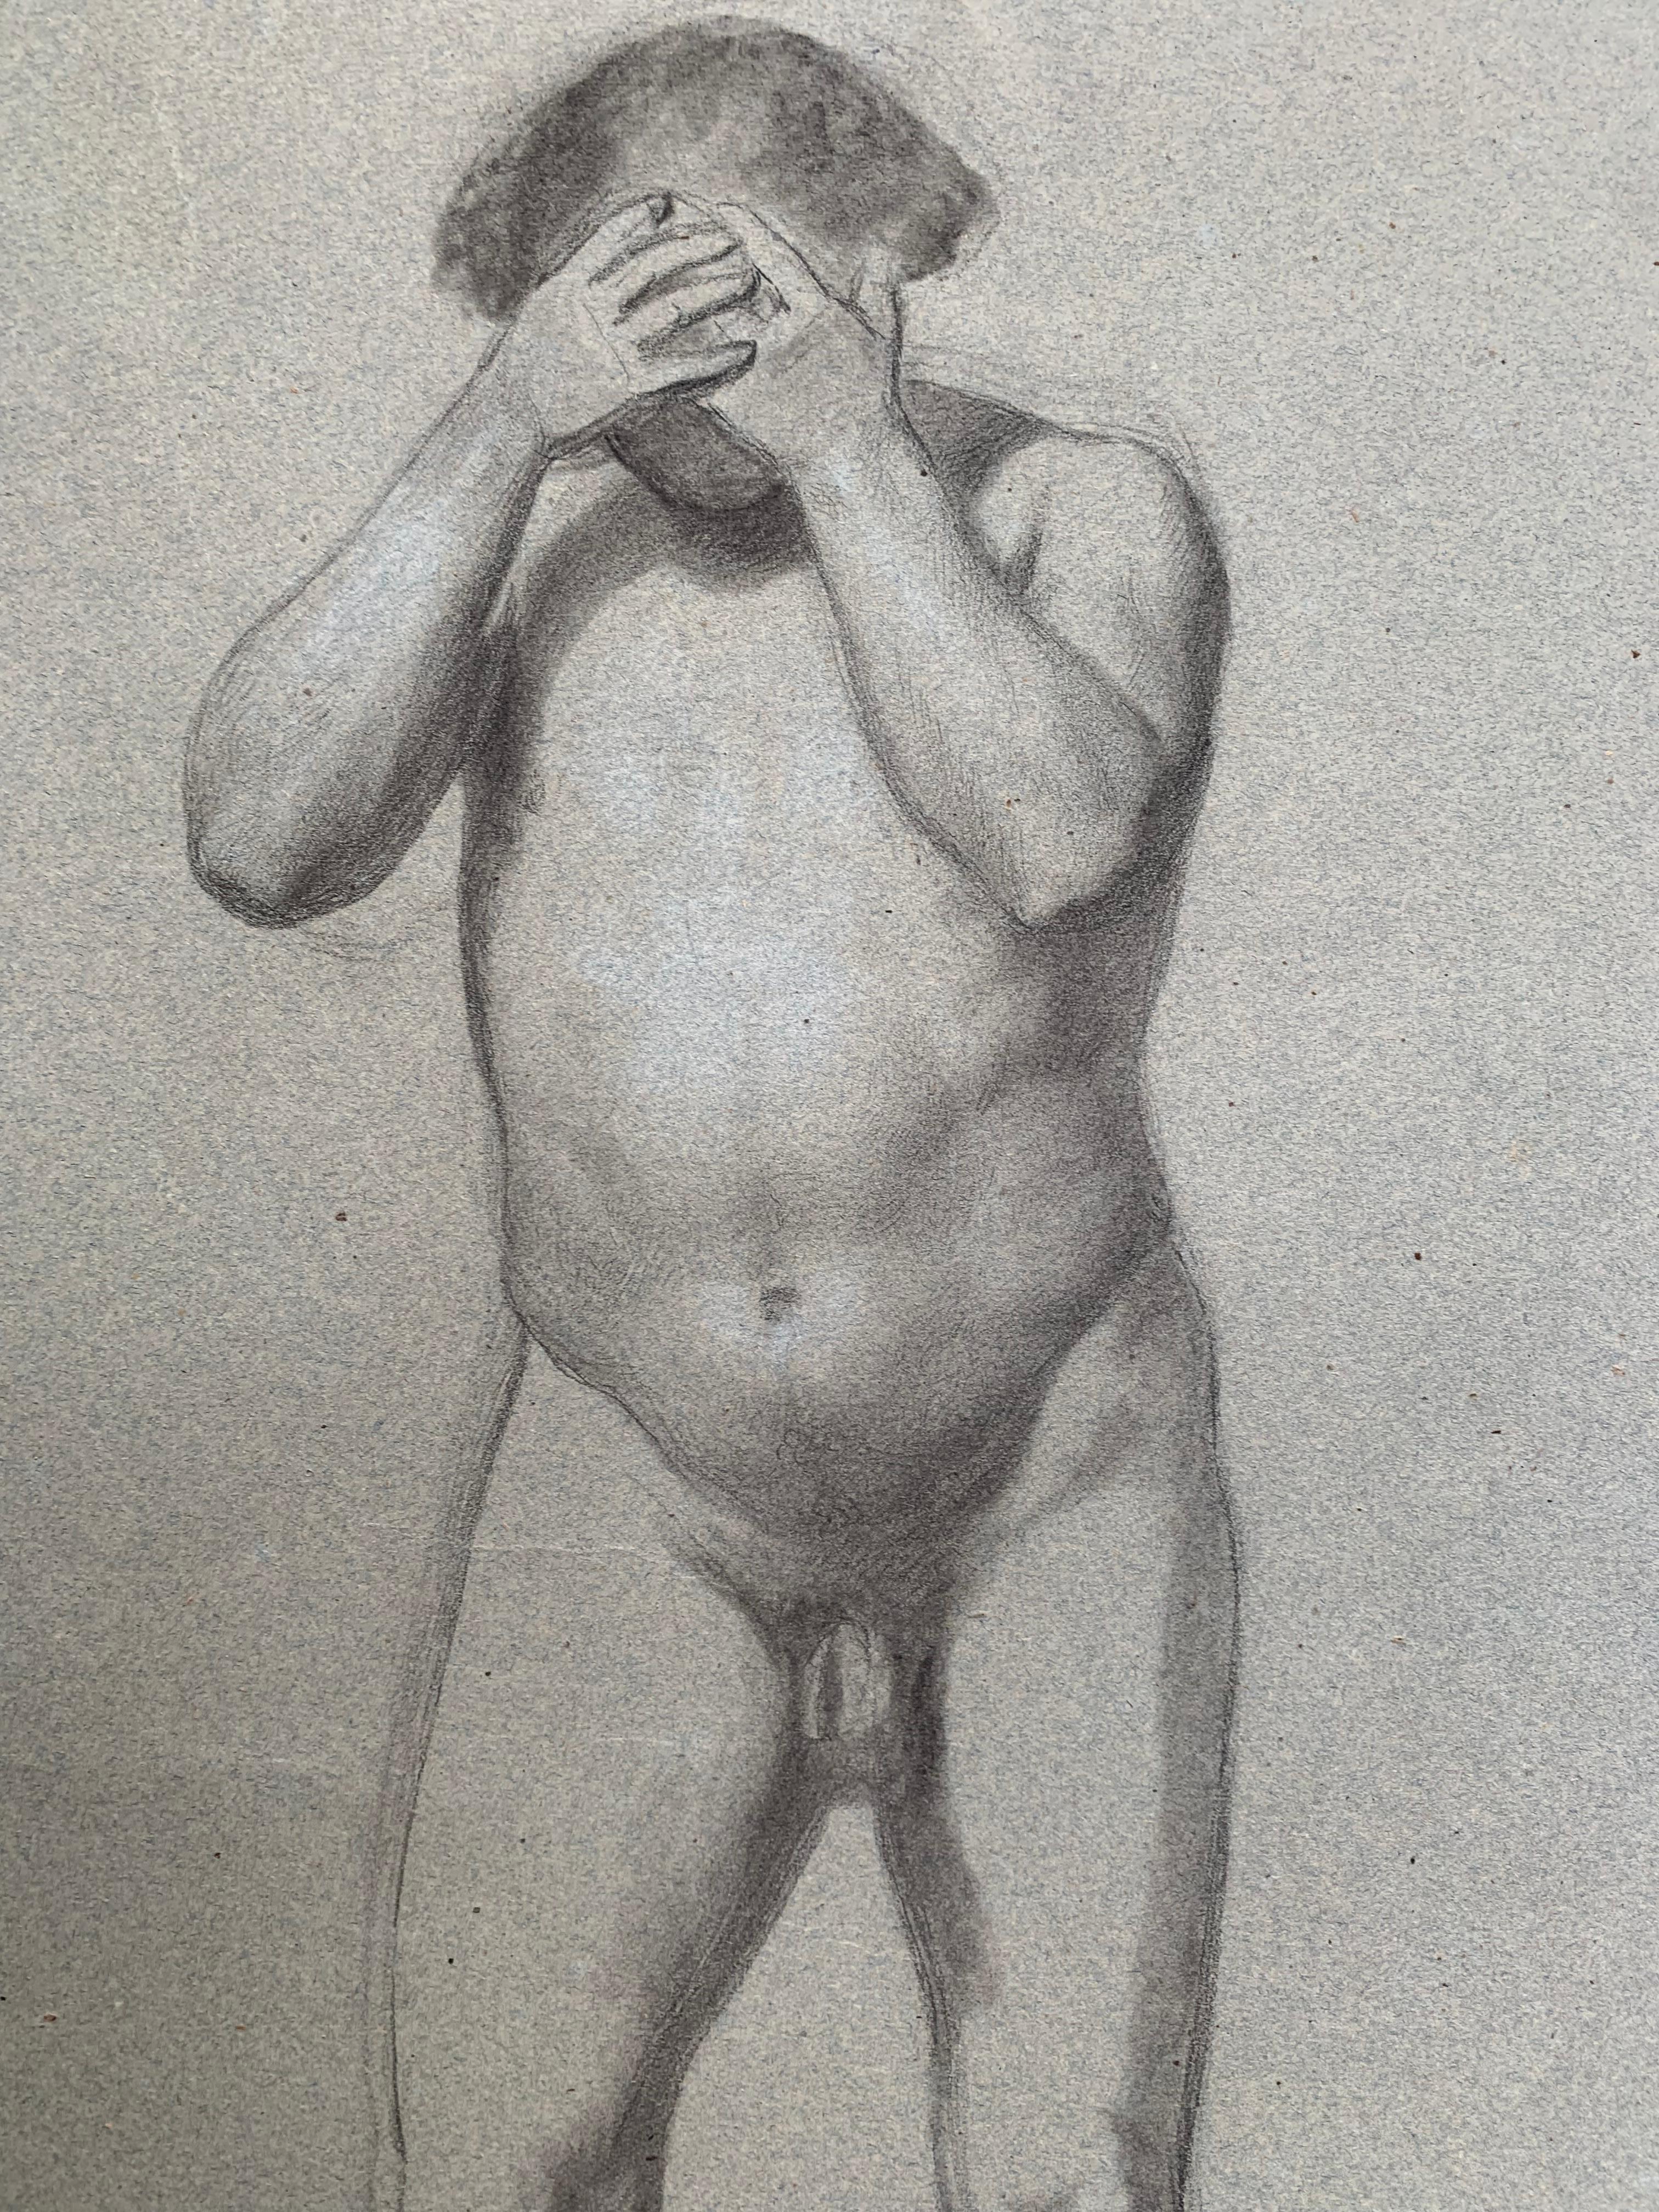 Preparatory anatomical study for the figure of a man with hands on his face. For Sale 8